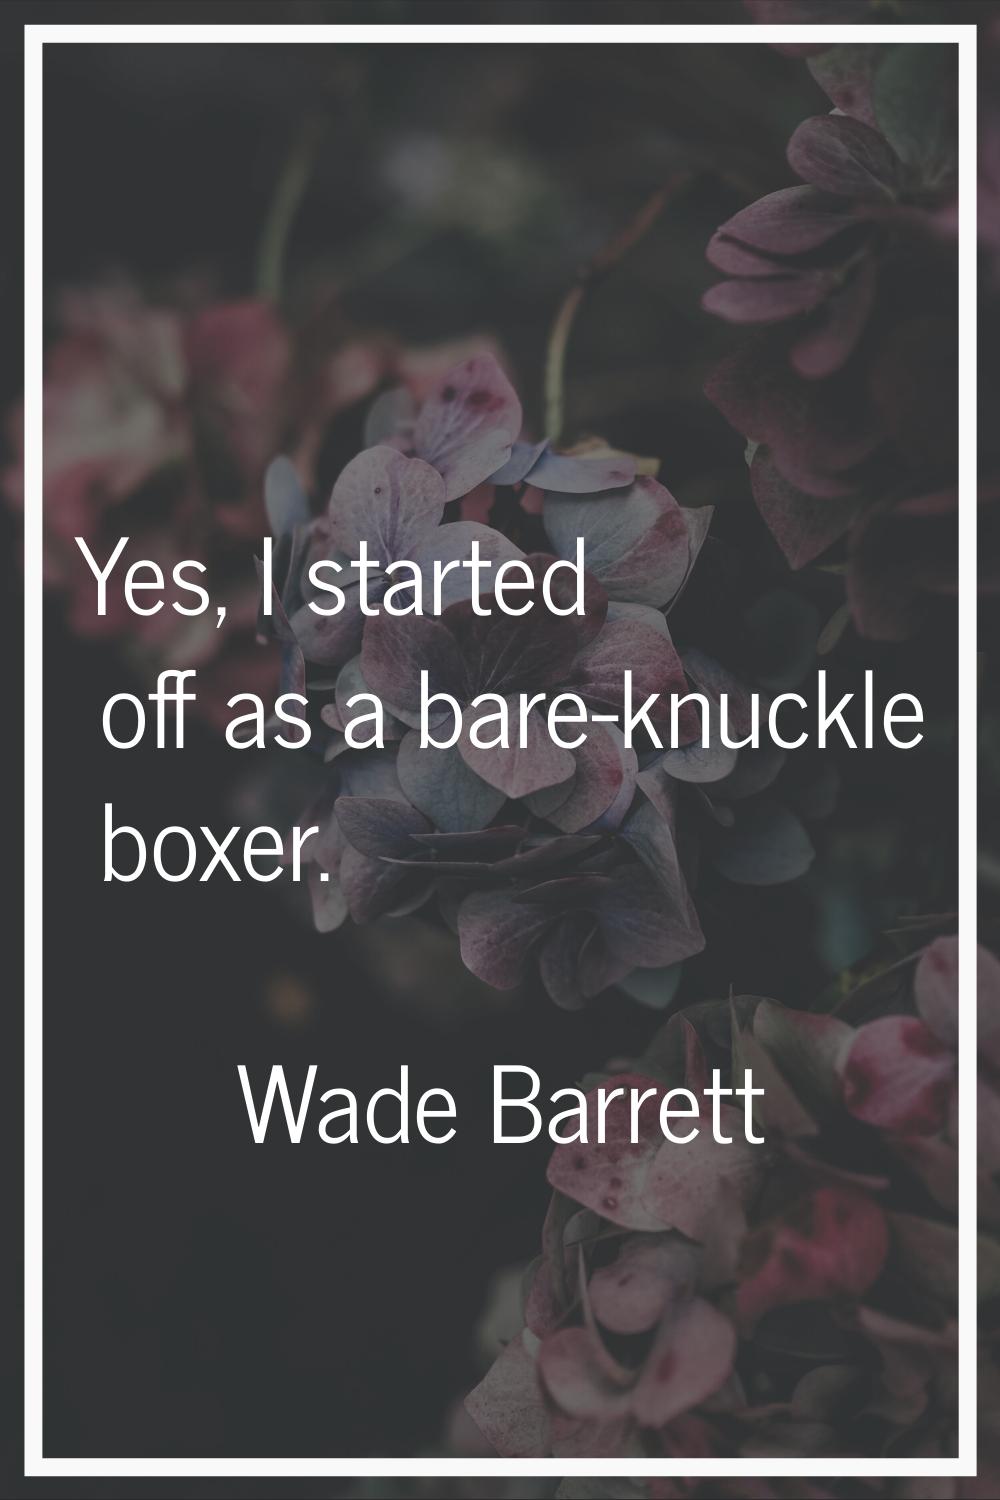 Yes, I started off as a bare-knuckle boxer.